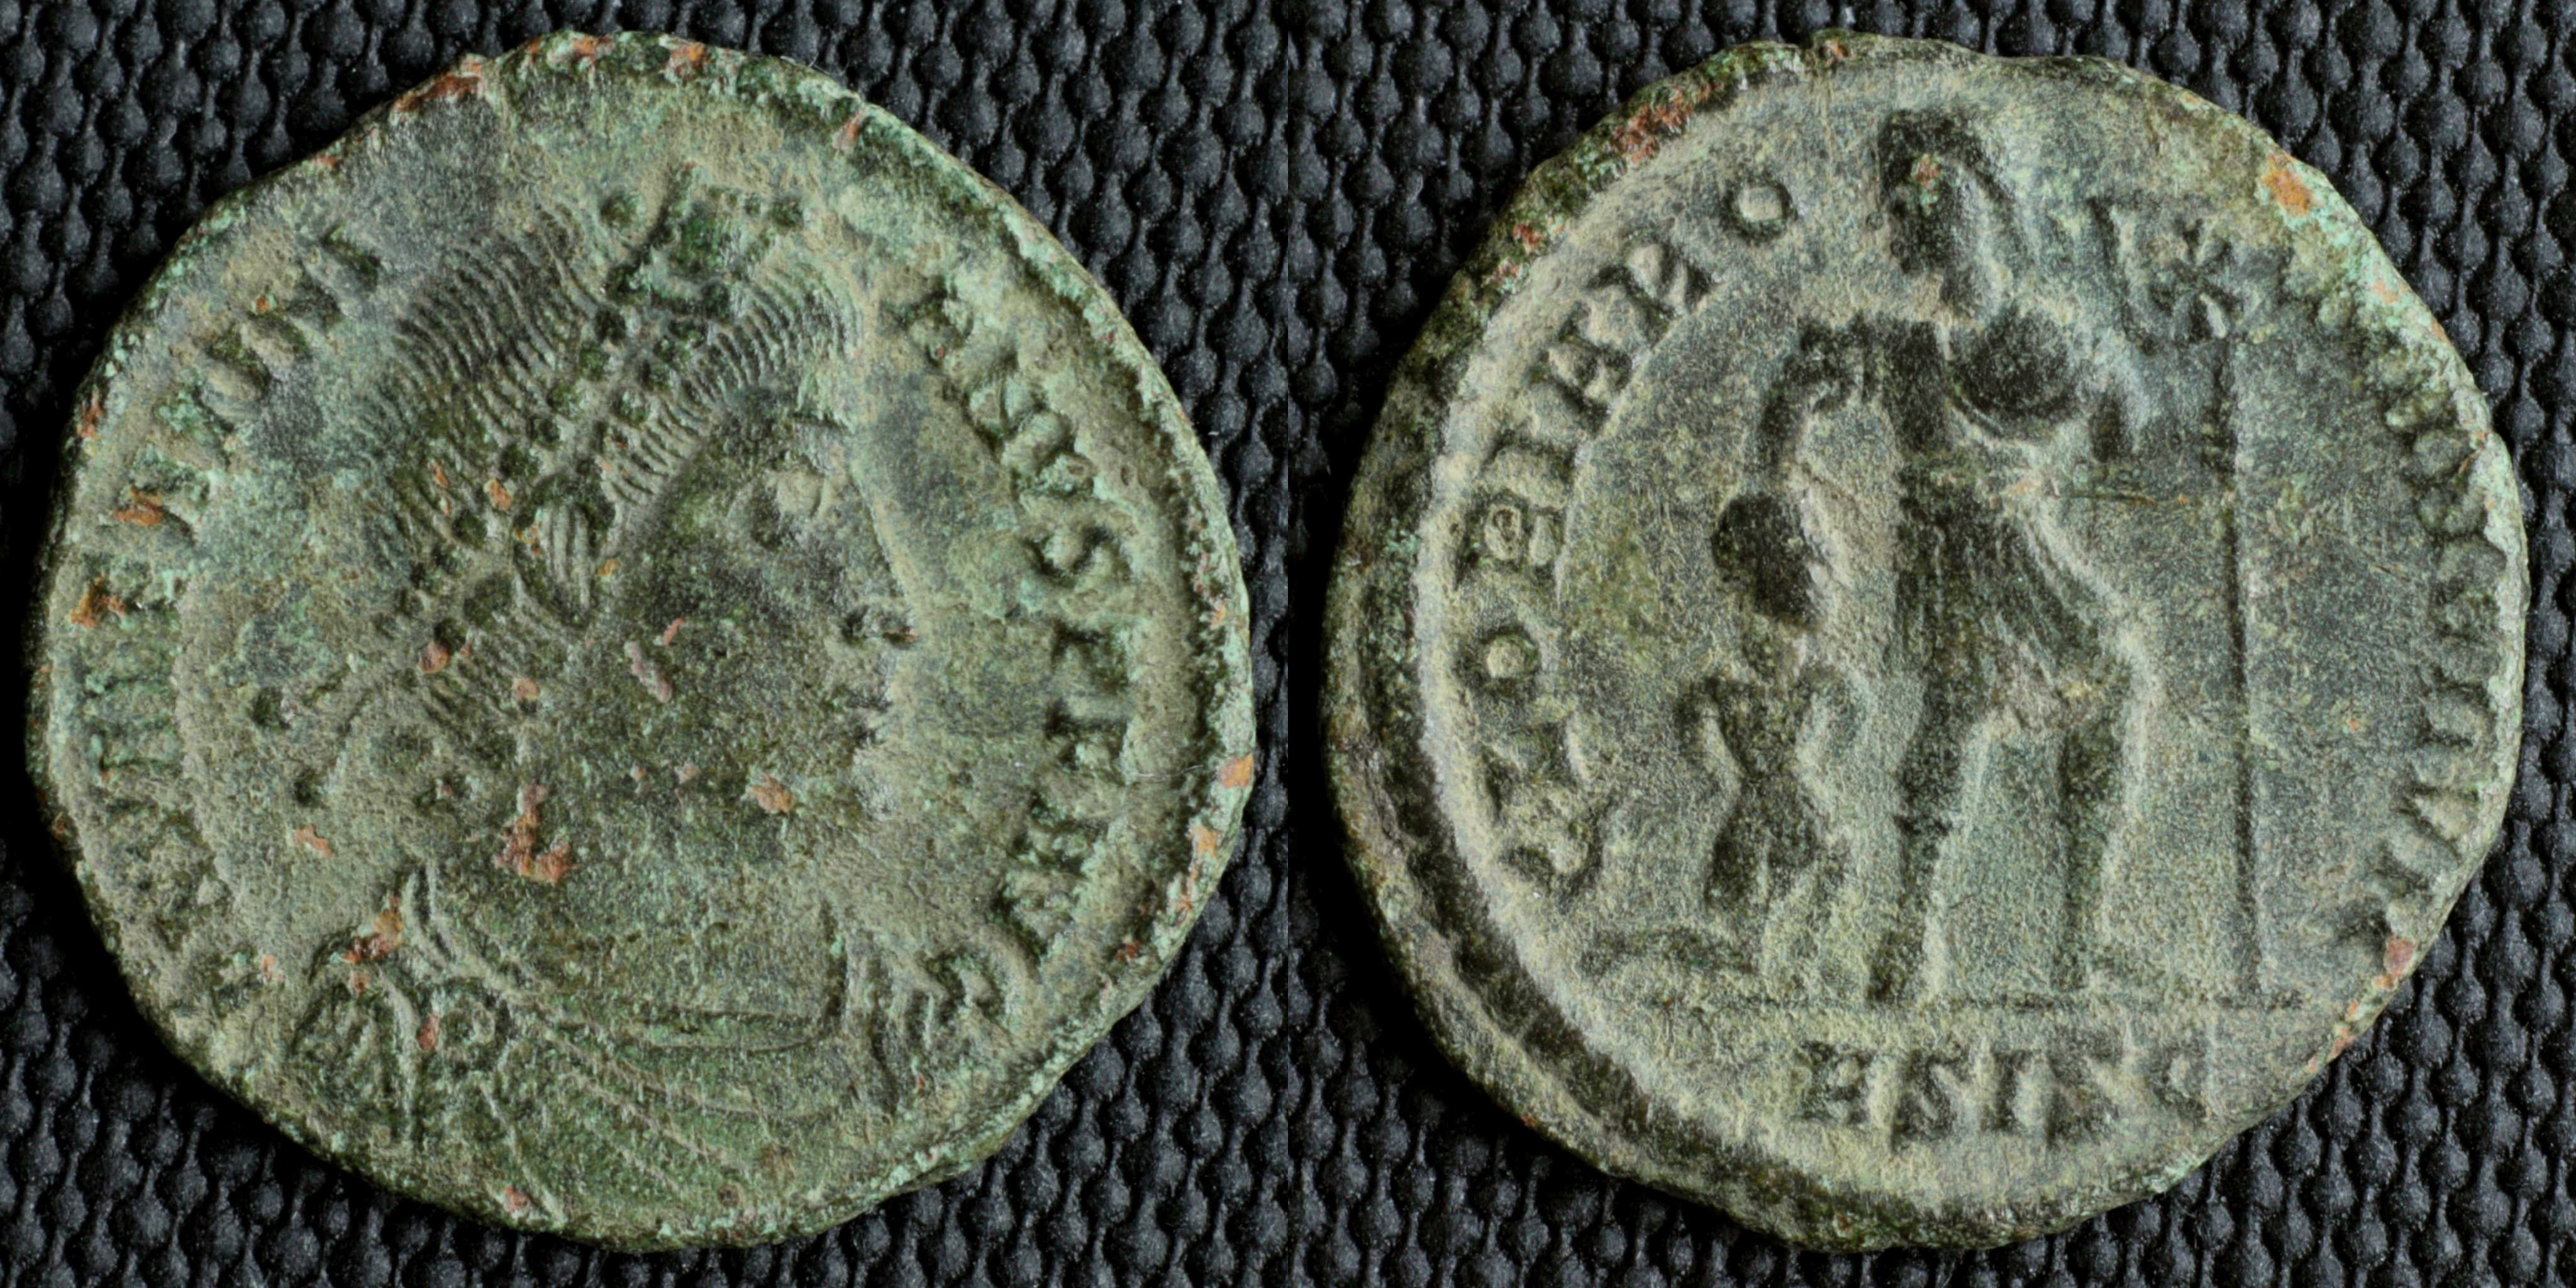 /Files/Images/Coinsite/CoinDB/89_Valentinianus_I_ASISC.jpg